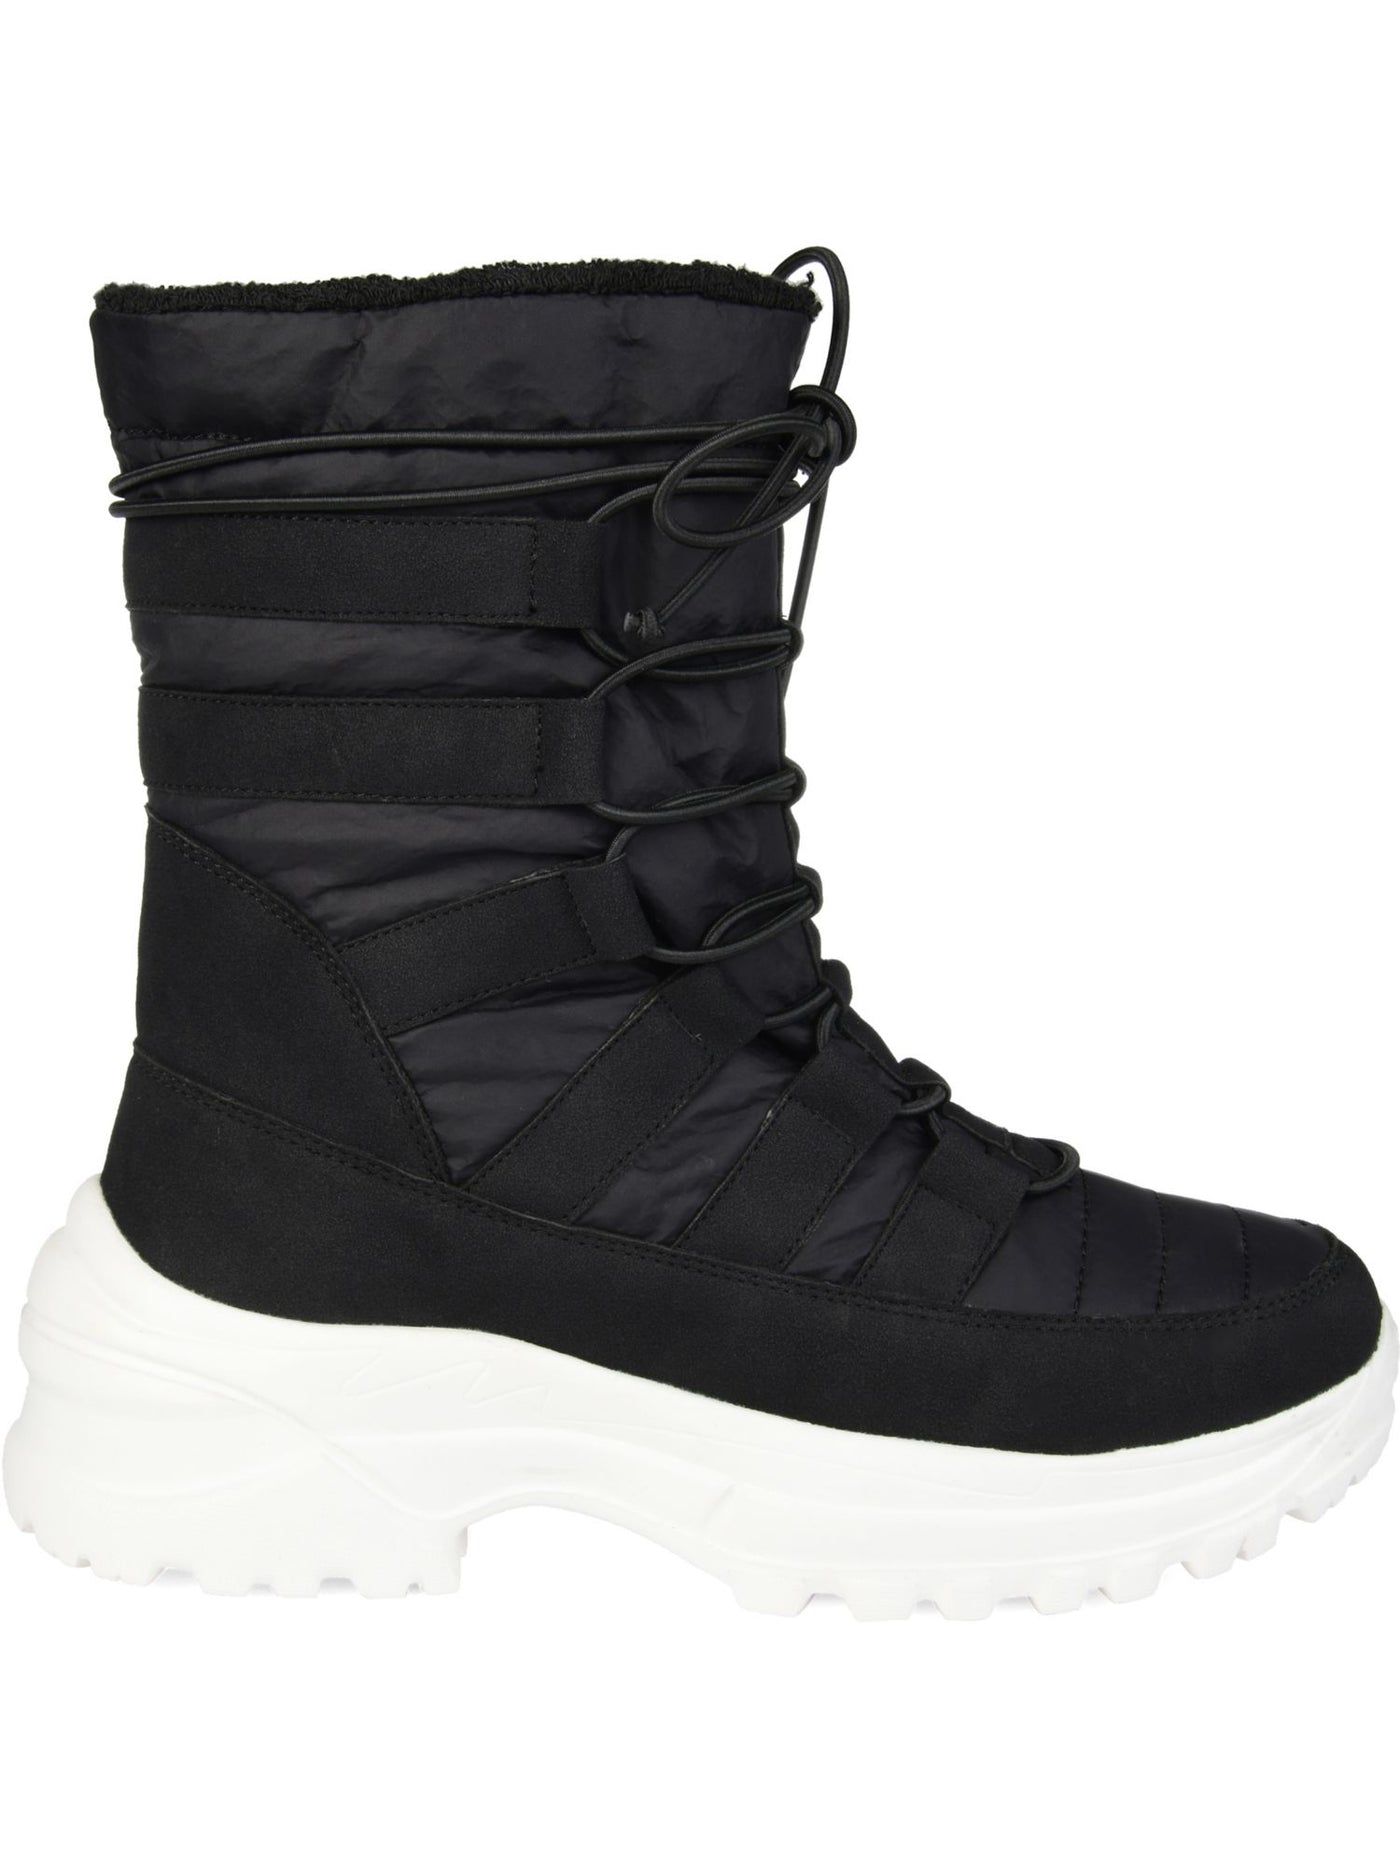 JOURNEE COLLECTION Womens Black Waterproof Icey Round Toe Platform Lace-Up Snow Boots 7.5